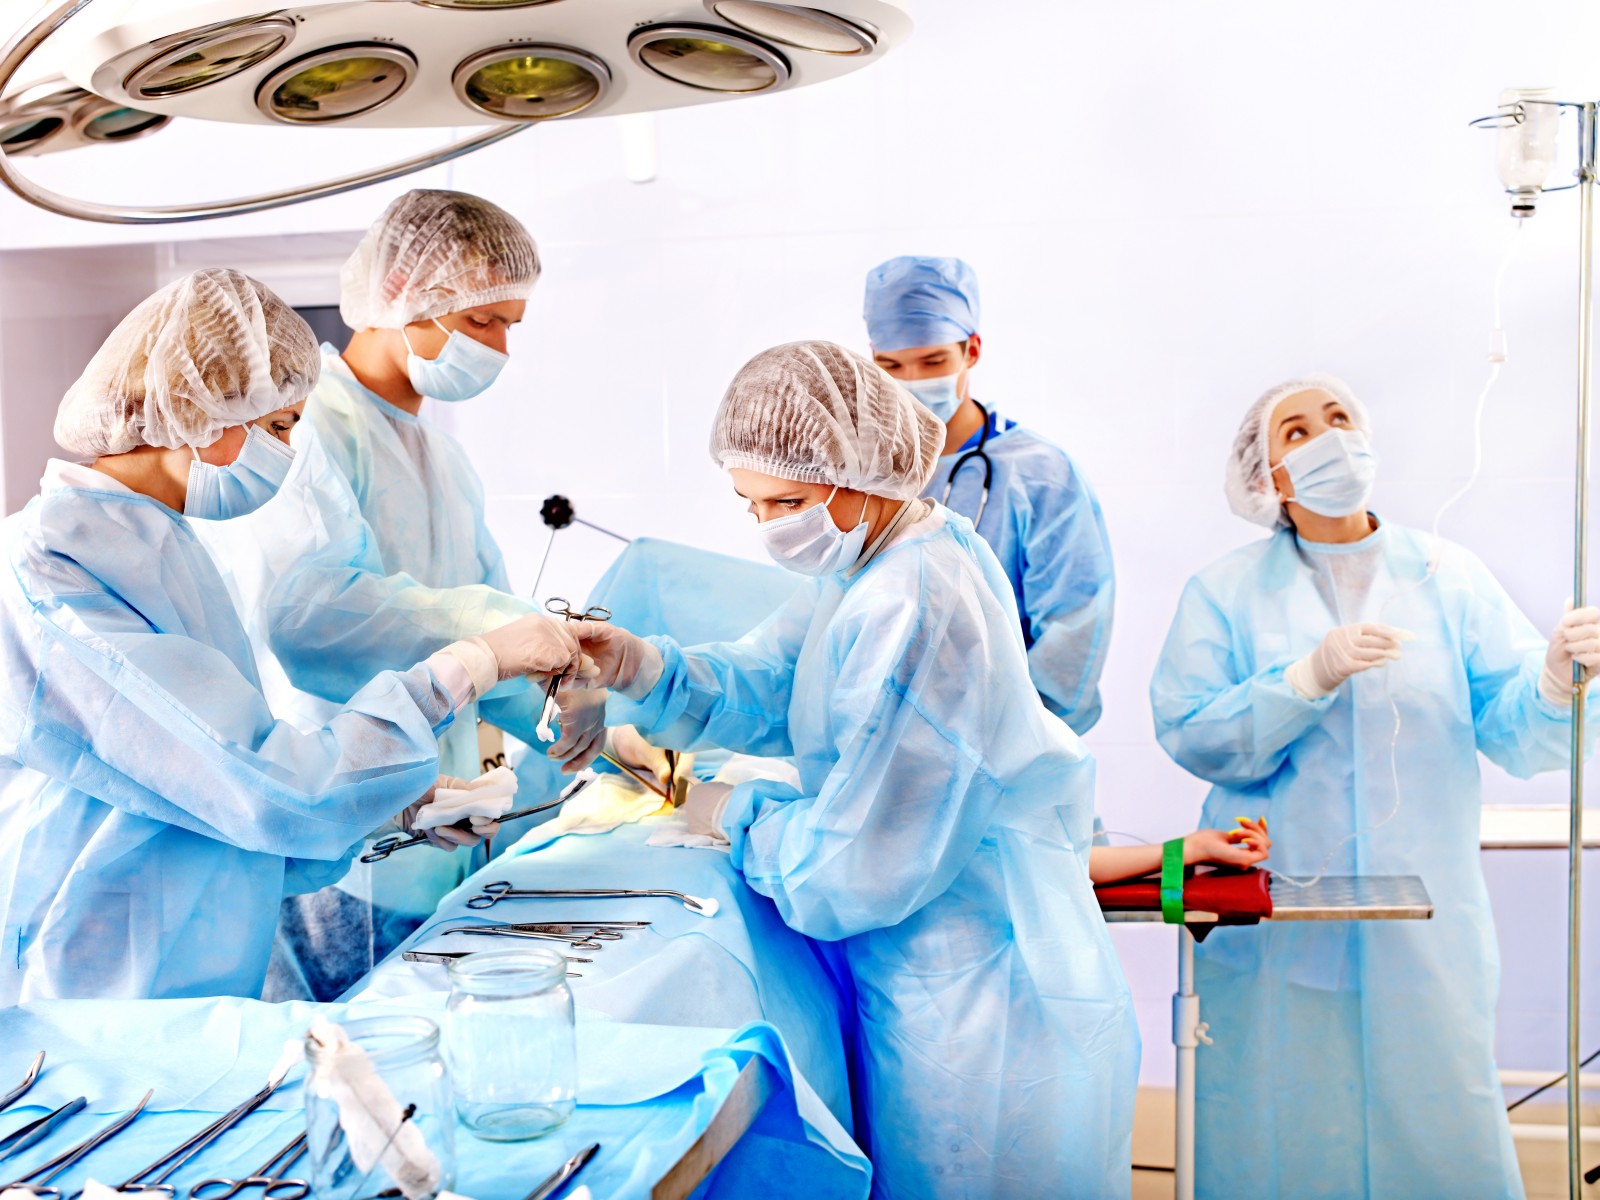 Surgeon Degree Programs – Information and Resources